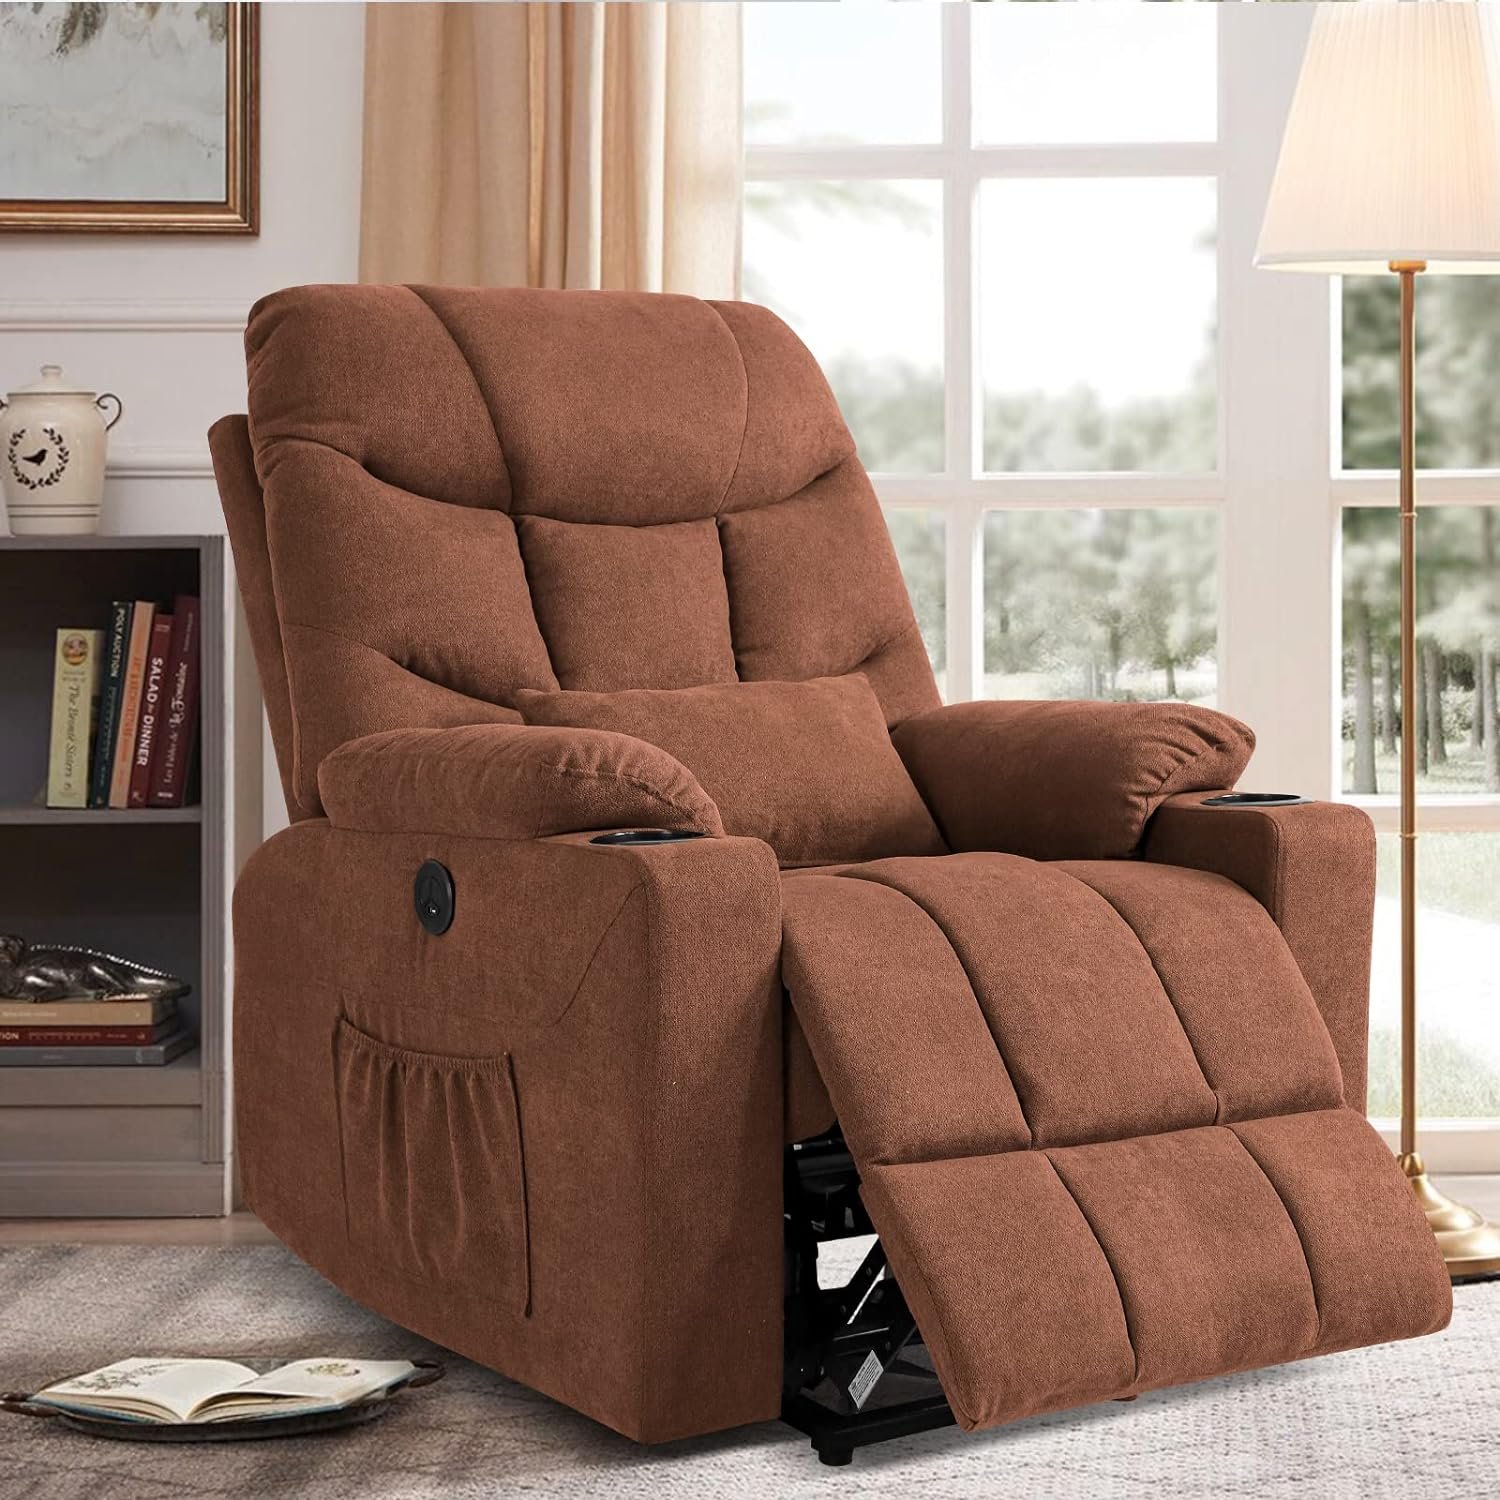 VUYUYU Power Lift Chairs Recliners, Velvet Recliner Chair for Elderly, Heated Vibration Massage Sofa for Living Room, 3 Positions, 2 Pockets and 2 Cup Holders (Velvet-Brown)